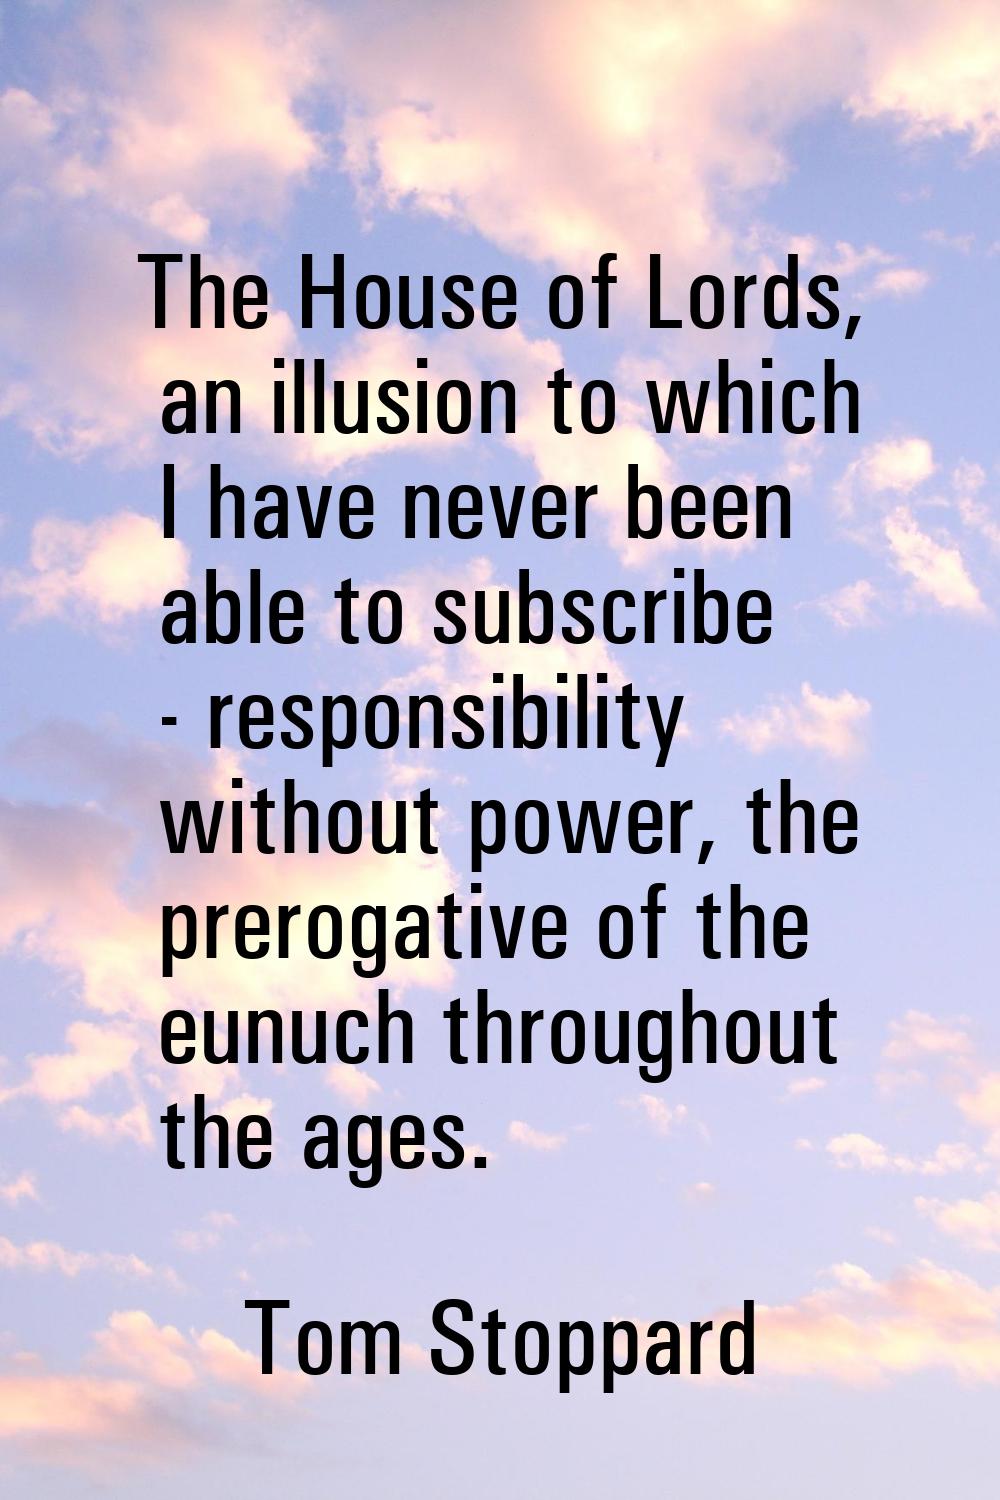 The House of Lords, an illusion to which I have never been able to subscribe - responsibility witho